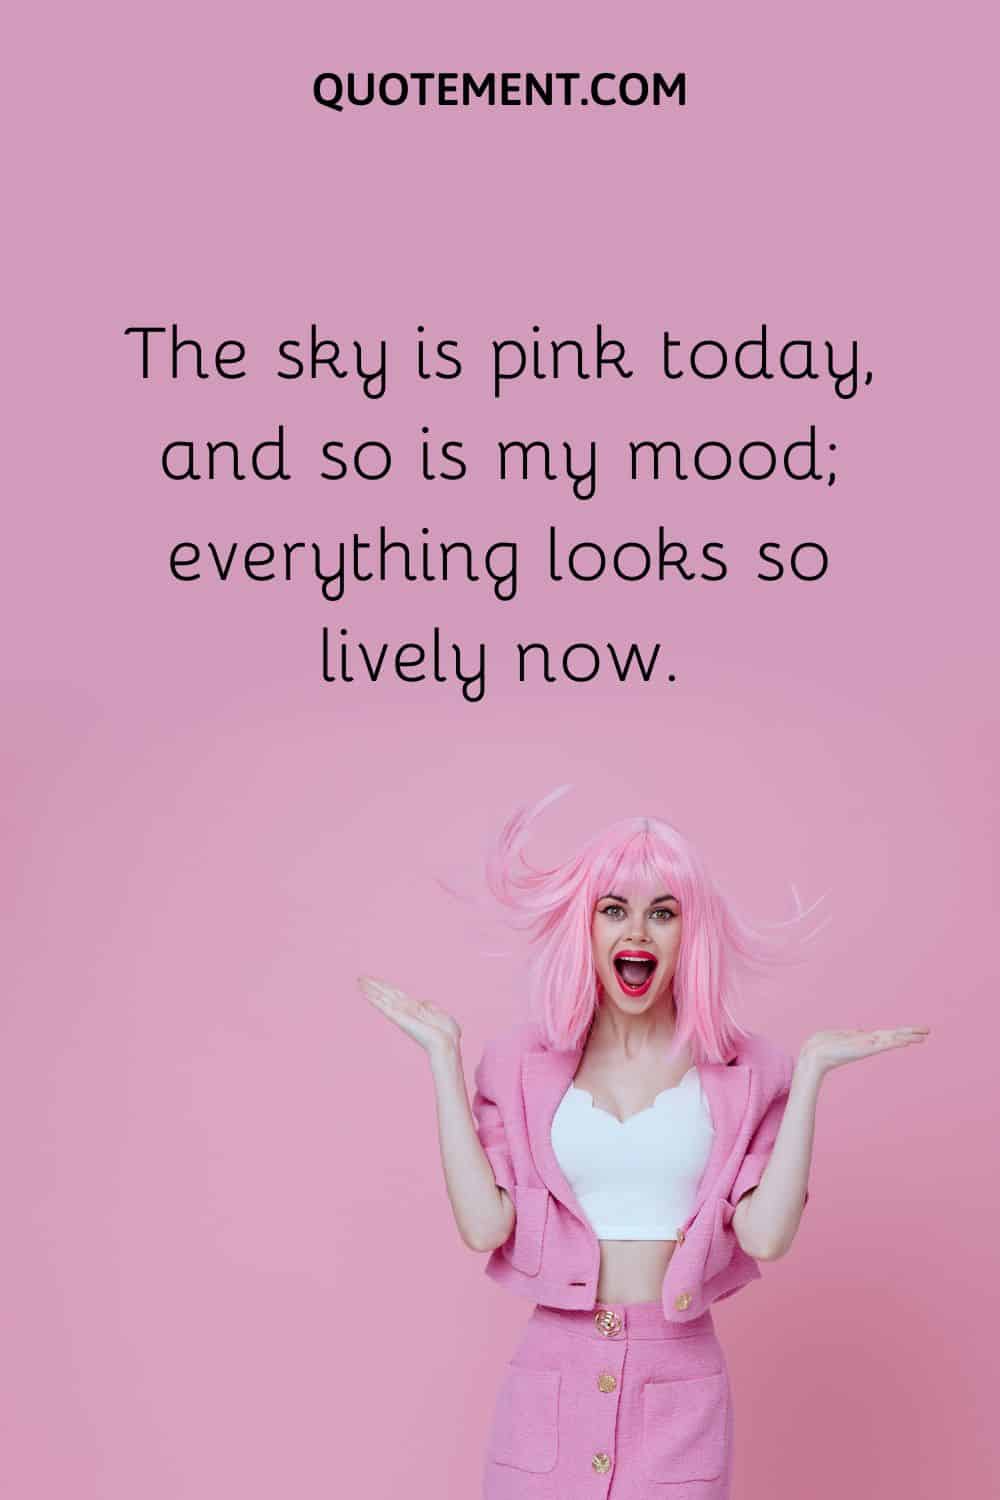 The sky is pink today, and so is my mood; everything looks so lively now.
